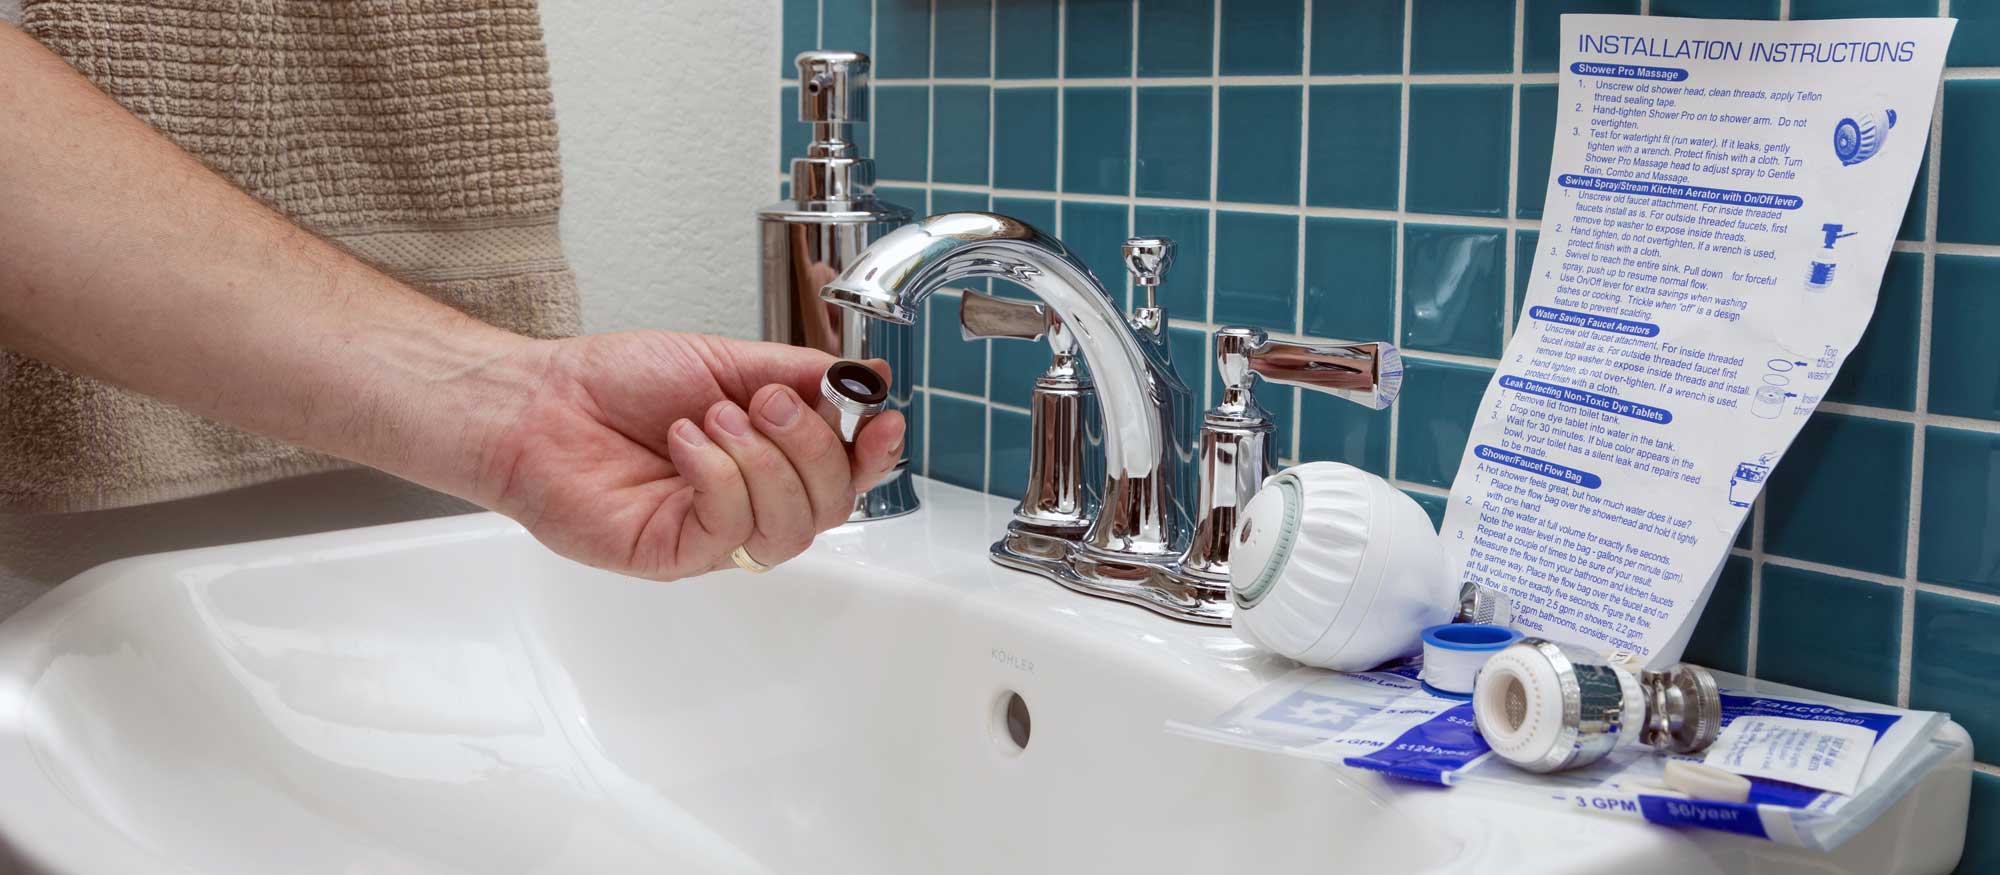 Get Your Kohler Shower Handle Off With These Simple Steps